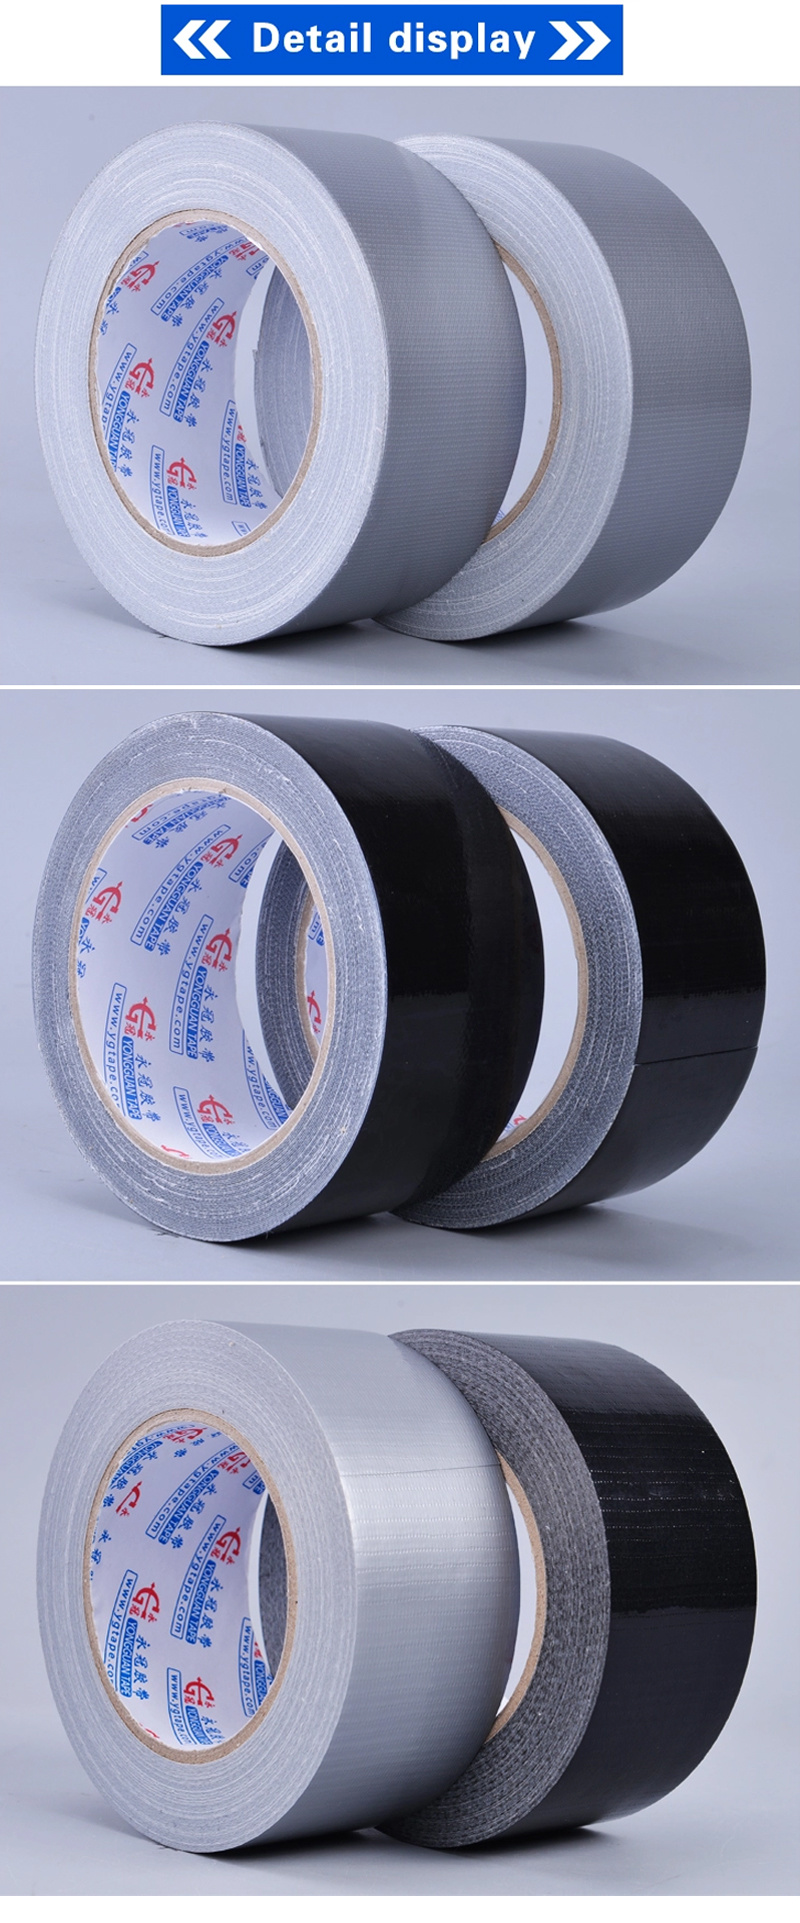 Hot Sell Cloth Duct Tape Jumbo Roll for Packaging and Fixation